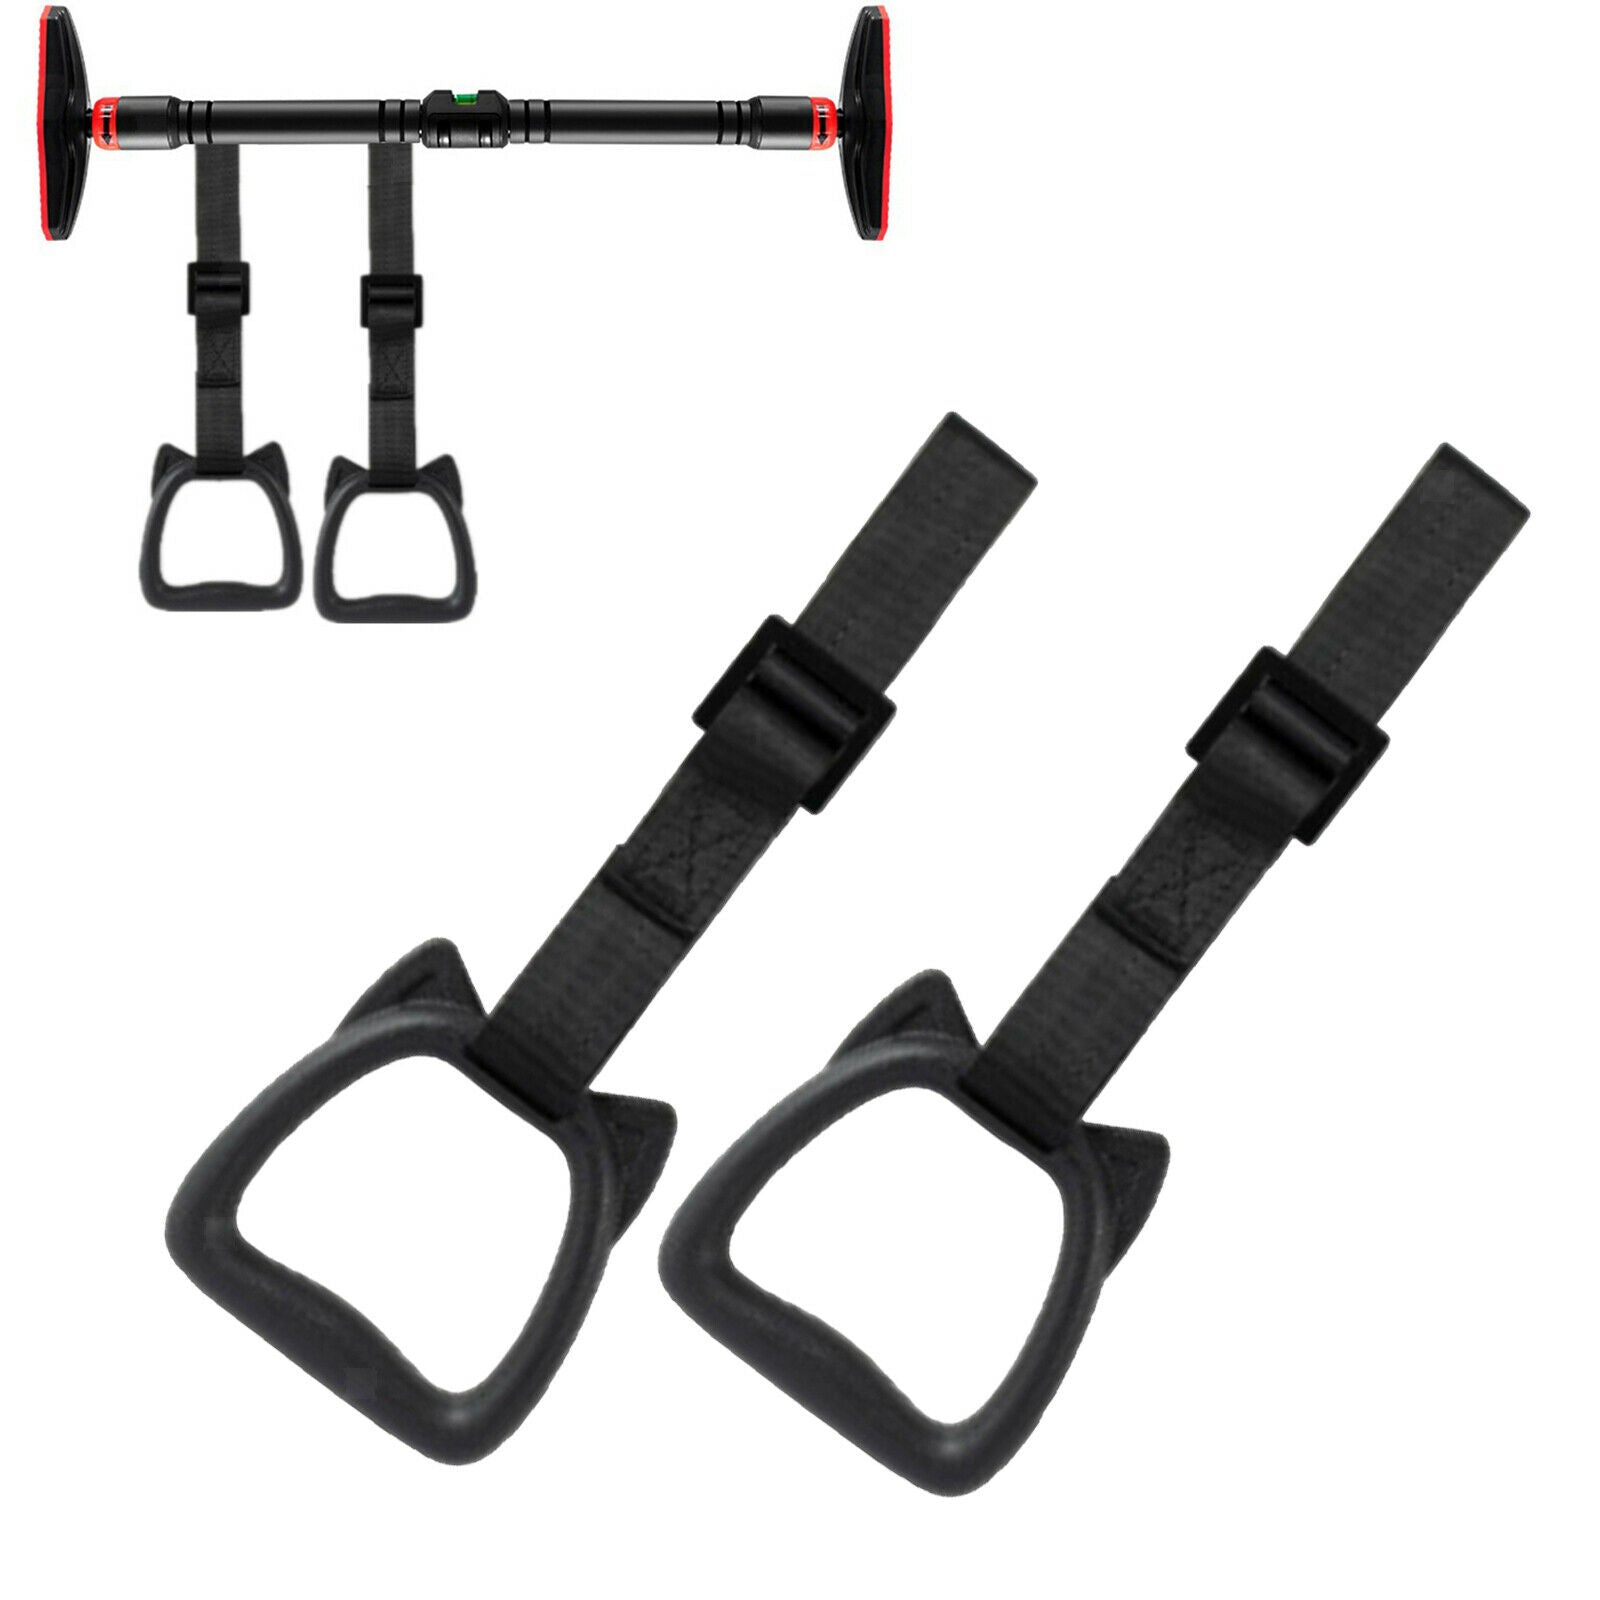 T-bar Row Pull-Up Hanging Gym Straps Handles Adjustable Strap Bar Attachment